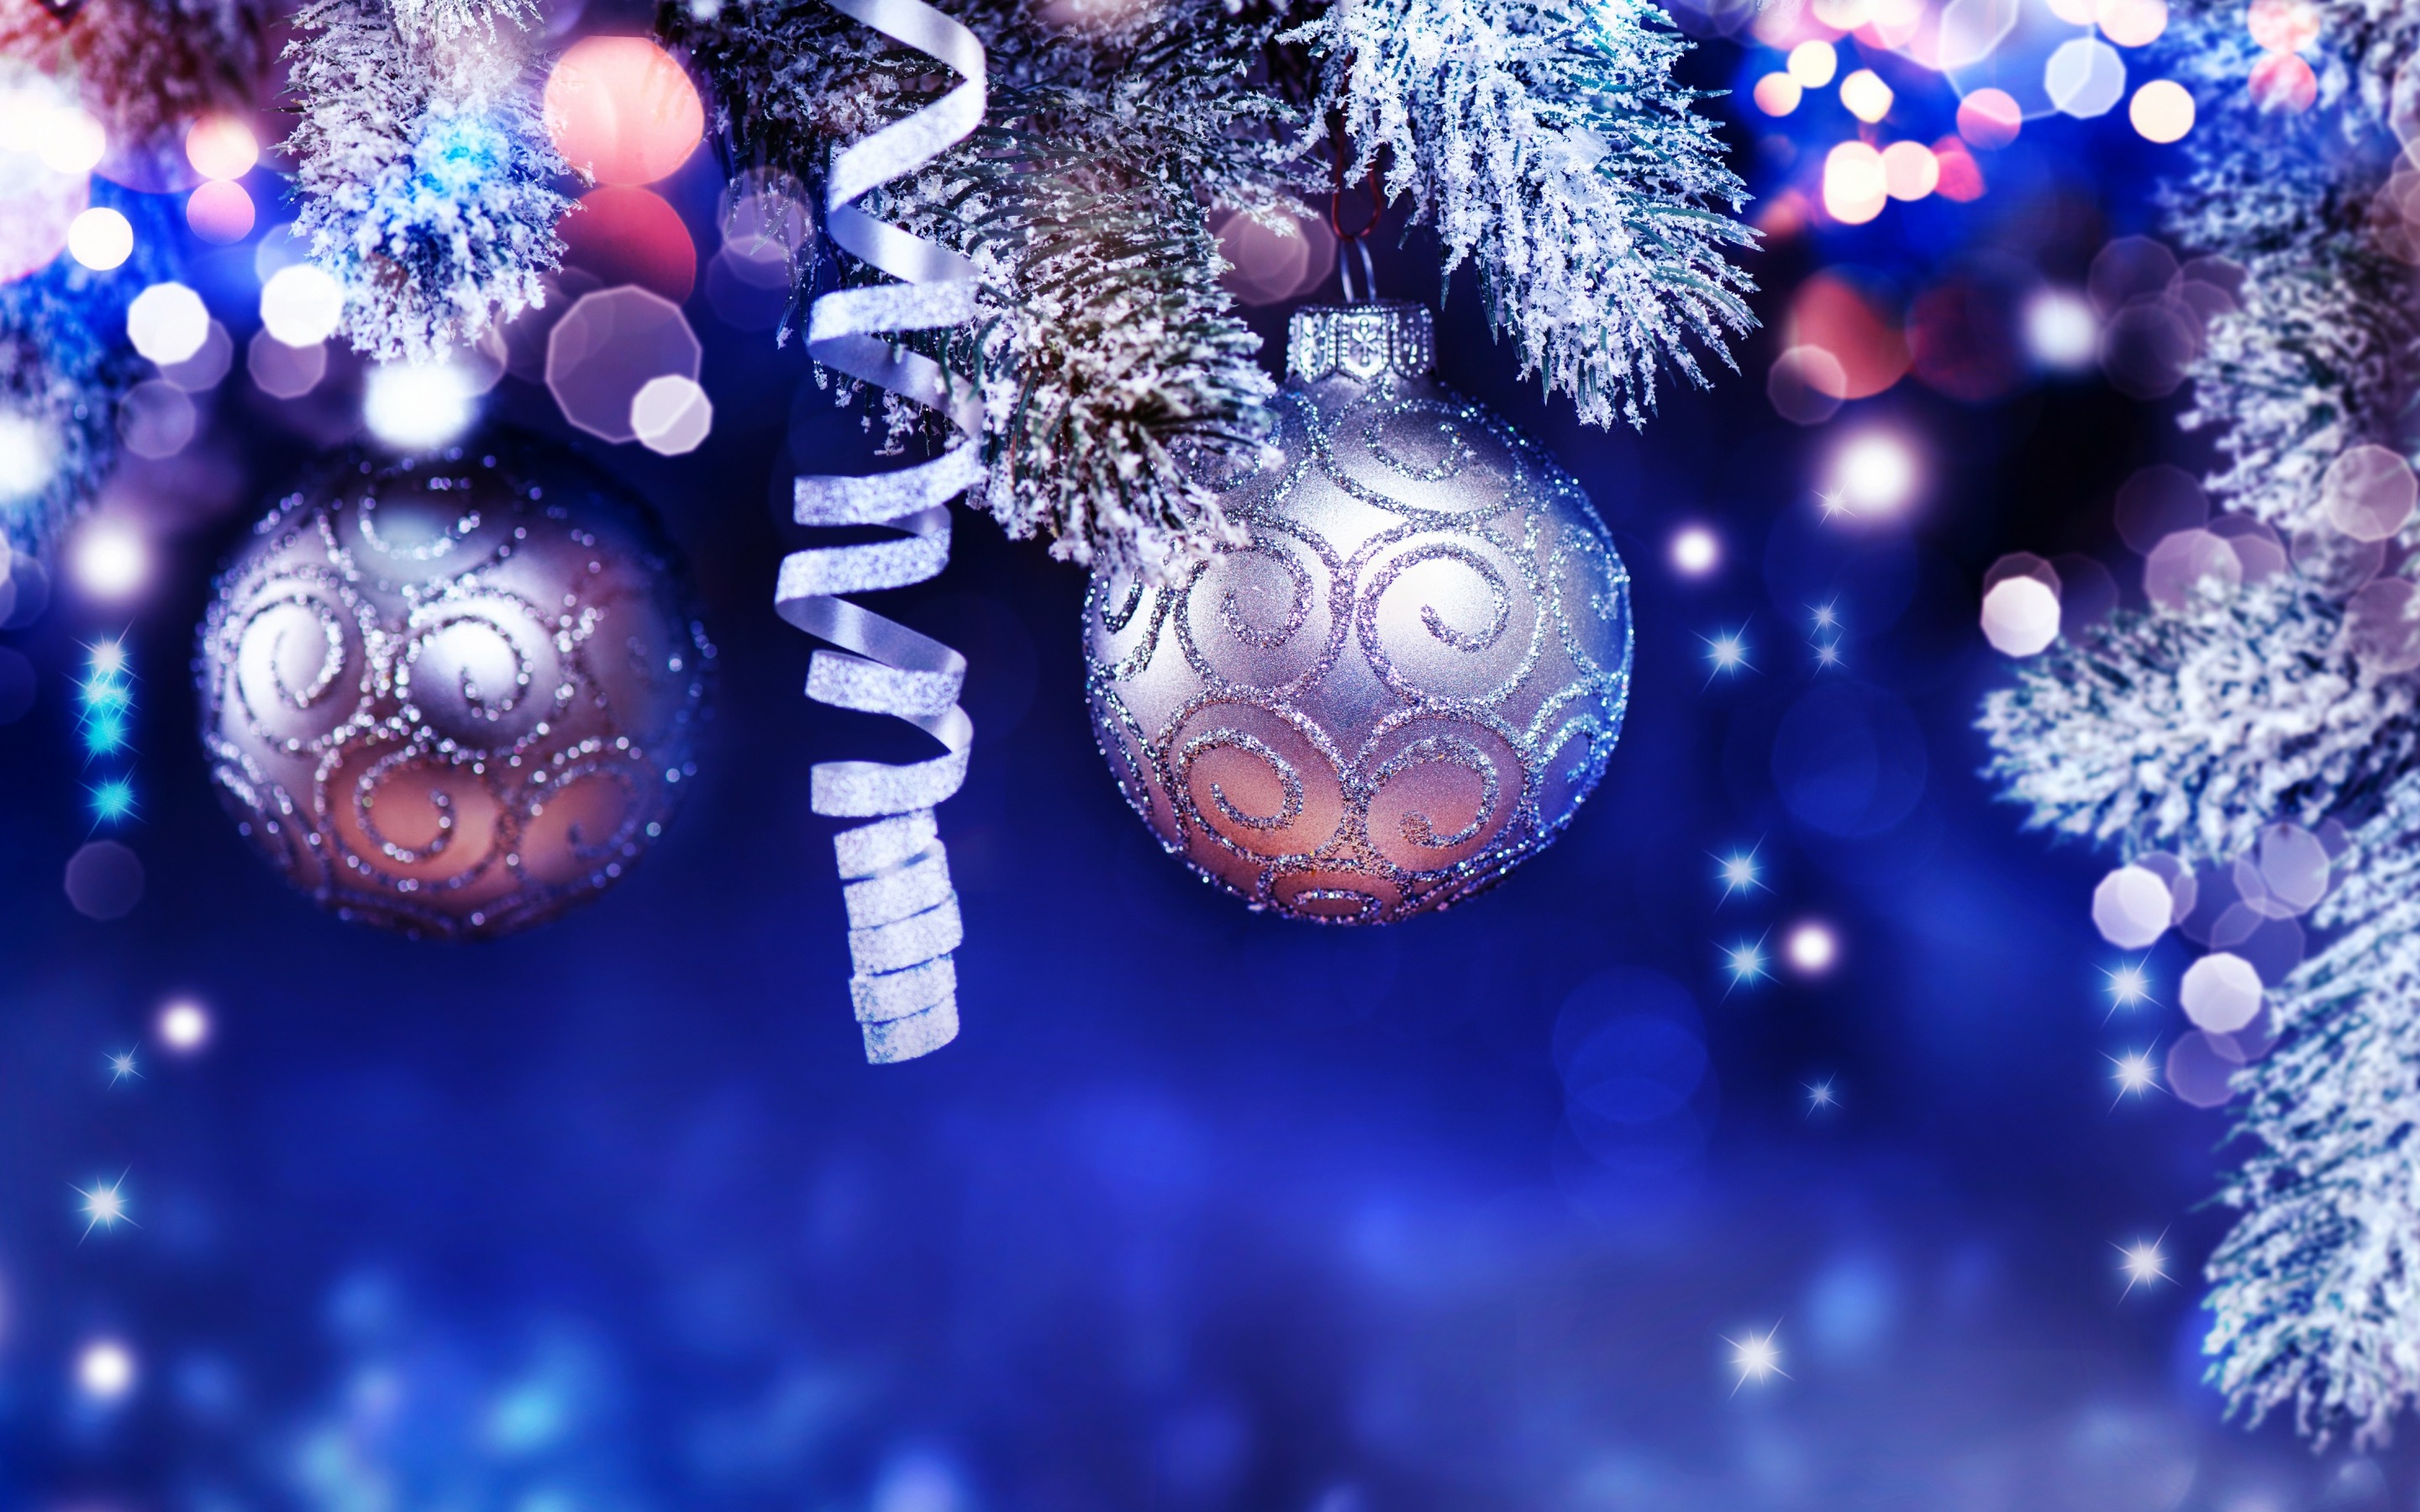 Download wallpaper New Year, Blue Christmas background, decoration, silver Christmas balls, silver ribbons, Christmas for desktop with resolution 2880x1800. High Quality HD picture wallpaper